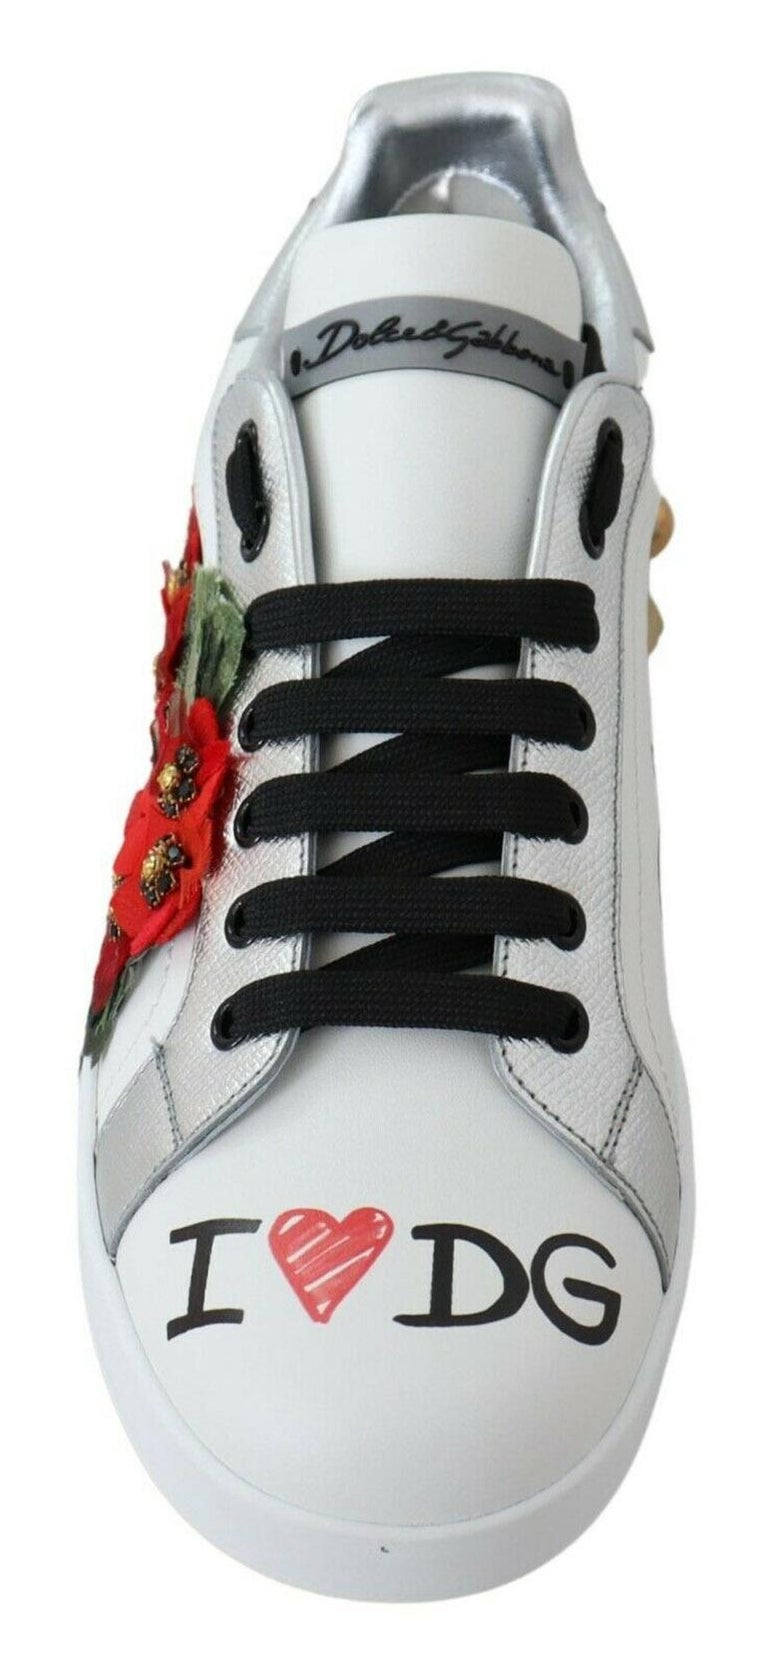 Dolce and Gabbana White Leather Floral Portofino Shoes Sport Sneakers I  Love DG For Sale at 1stDibs